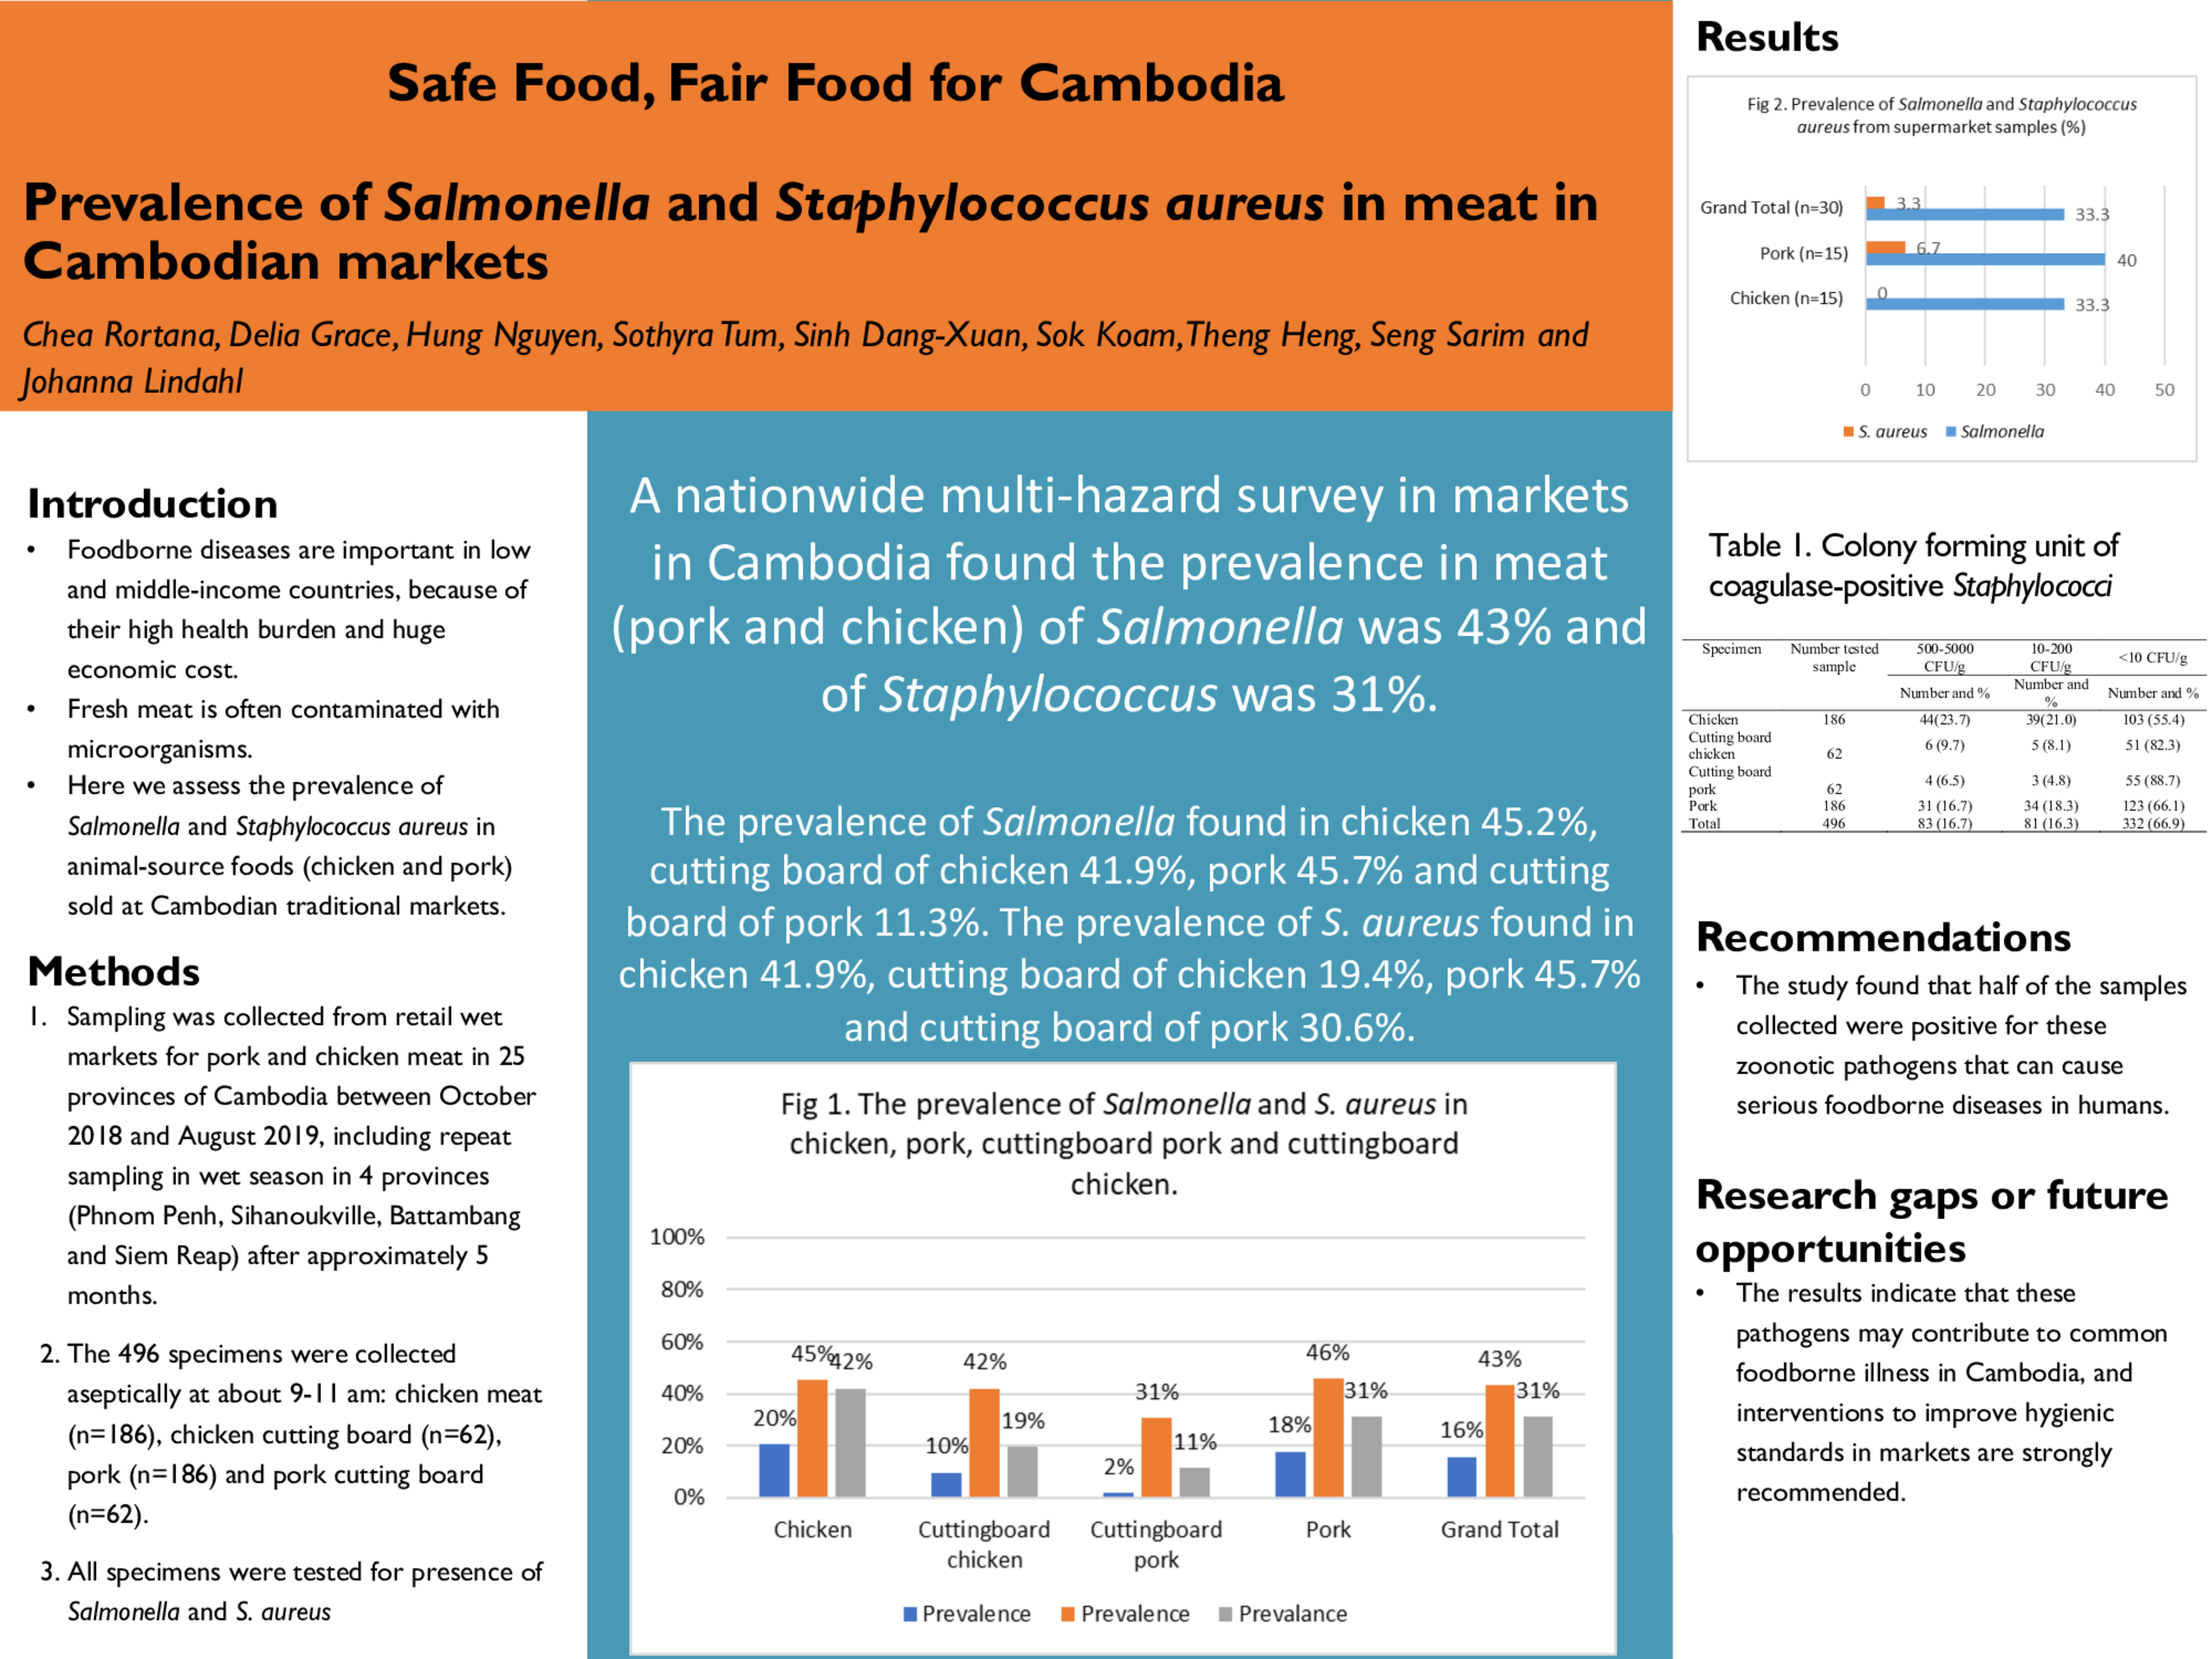 Safe Food, Fair Food for Cambodia - Prevalence of Salmonella and Staphylococcus aureus in meat in Cambodian markets